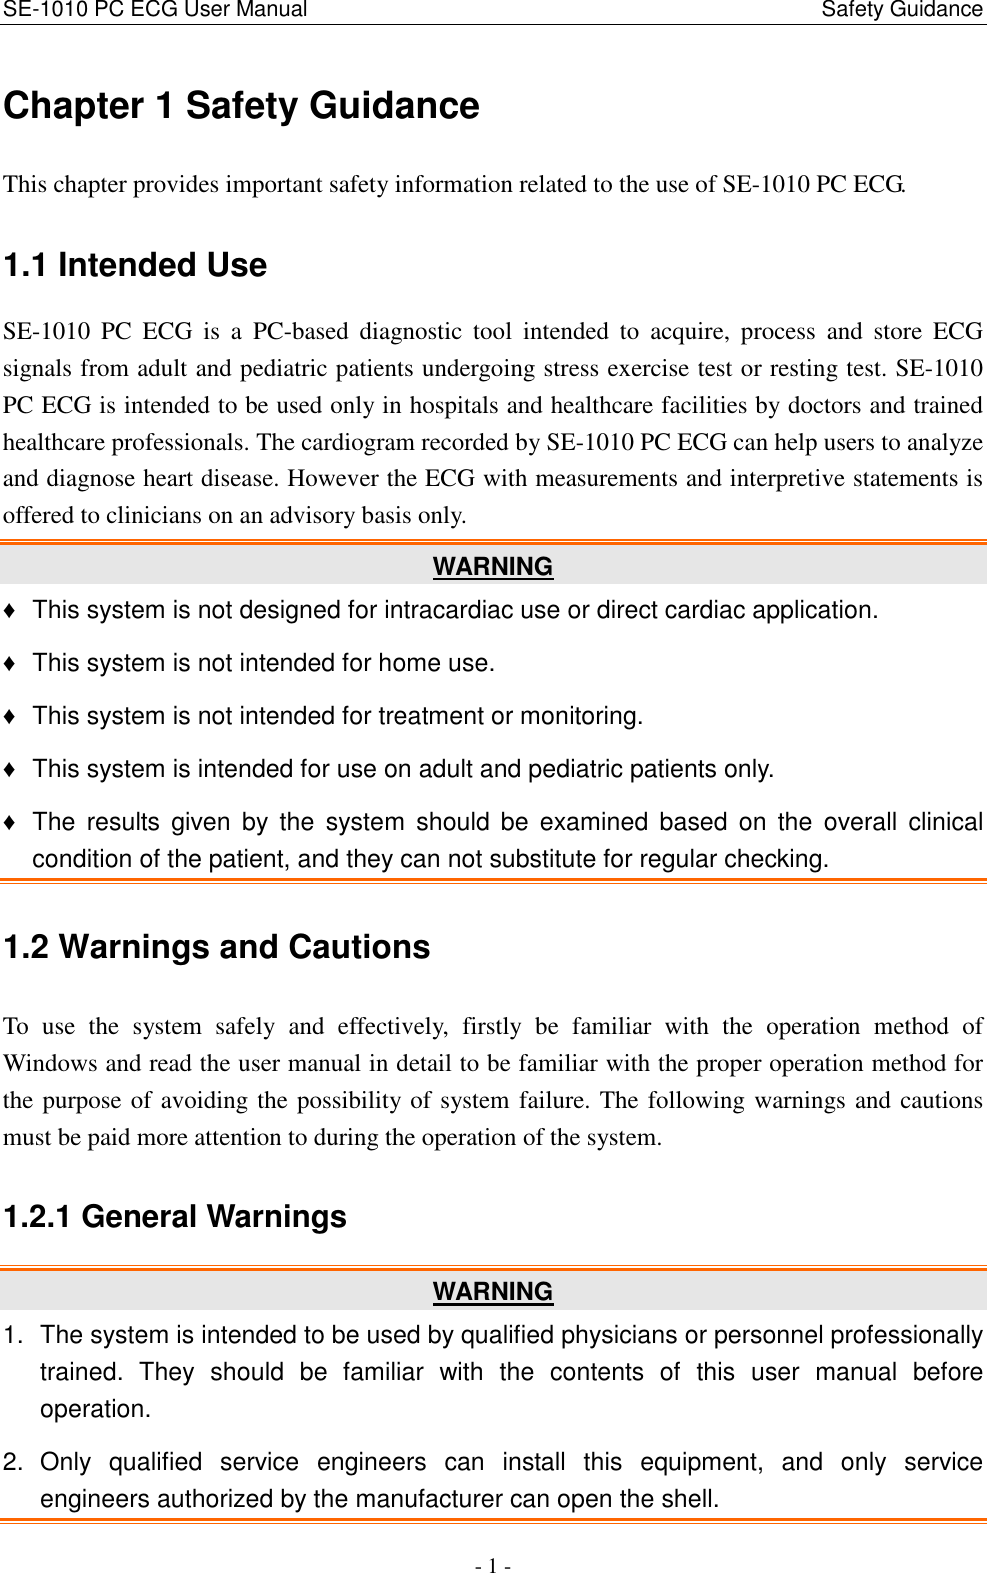 SE-1010 PC ECG User Manual                                                                                              Safety Guidance - 1 - Chapter 1 Safety Guidance This chapter provides important safety information related to the use of SE-1010 PC ECG. 1.1 Intended Use SE-1010  PC  ECG  is  a  PC-based  diagnostic  tool  intended  to  acquire,  process  and  store  ECG signals from adult and pediatric patients undergoing stress exercise test or resting test. SE-1010 PC ECG is intended to be used only in hospitals and healthcare facilities by doctors and trained healthcare professionals. The cardiogram recorded by SE-1010 PC ECG can help users to analyze and diagnose heart disease. However the ECG with measurements and interpretive statements is offered to clinicians on an advisory basis only. WARNING ♦  This system is not designed for intracardiac use or direct cardiac application. ♦  This system is not intended for home use. ♦  This system is not intended for treatment or monitoring. ♦  This system is intended for use on adult and pediatric patients only. ♦  The  results  given  by  the  system  should  be  examined  based  on  the  overall  clinical condition of the patient, and they can not substitute for regular checking. 1.2 Warnings and Cautions To  use  the  system  safely  and  effectively,  firstly  be  familiar  with  the  operation  method  of Windows and read the user manual in detail to be familiar with the proper operation method for the purpose of avoiding the possibility of system failure. The following warnings and cautions must be paid more attention to during the operation of the system. 1.2.1 General Warnings WARNING 1.  The system is intended to be used by qualified physicians or personnel professionally trained.  They  should  be  familiar  with  the  contents  of  this  user  manual  before operation. 2.  Only  qualified  service  engineers  can  install  this  equipment,  and  only  service engineers authorized by the manufacturer can open the shell. 